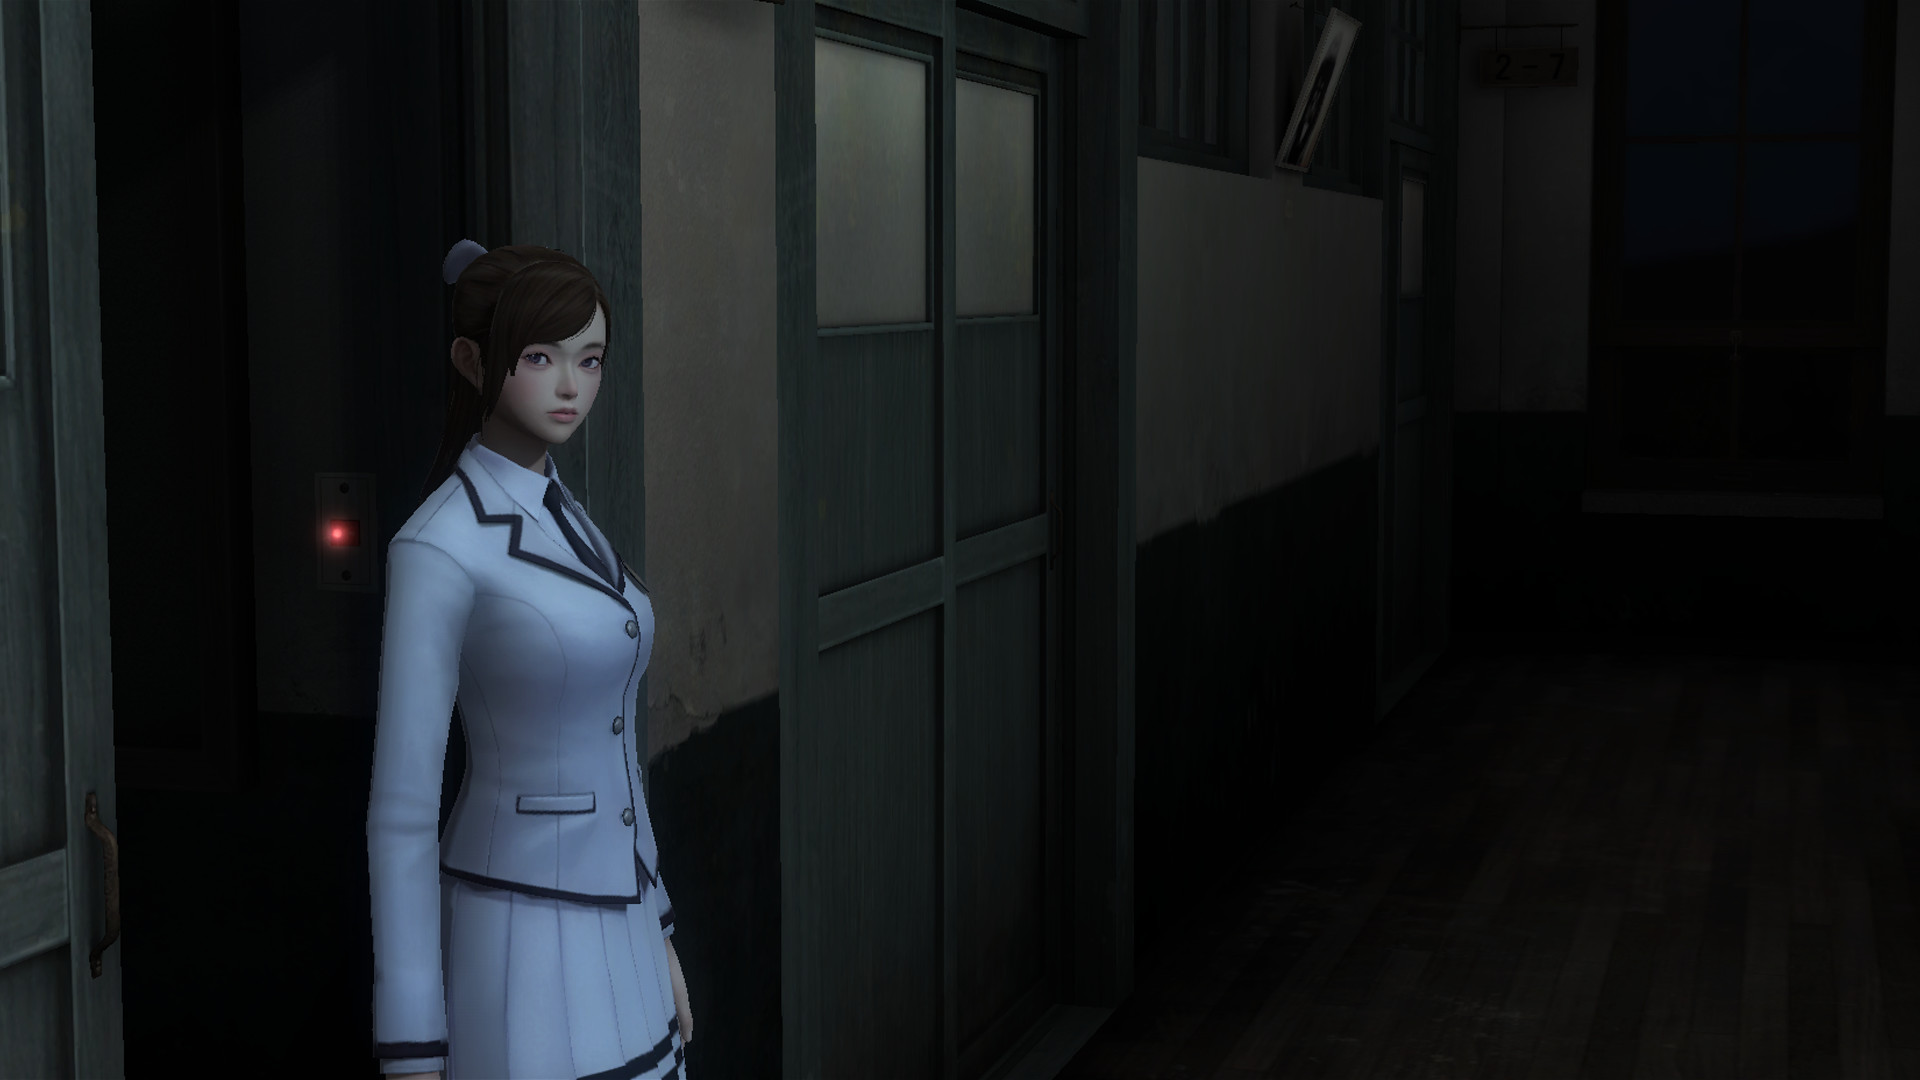 White Day - Apple School Uniform - So-Young Han Featured Screenshot #1